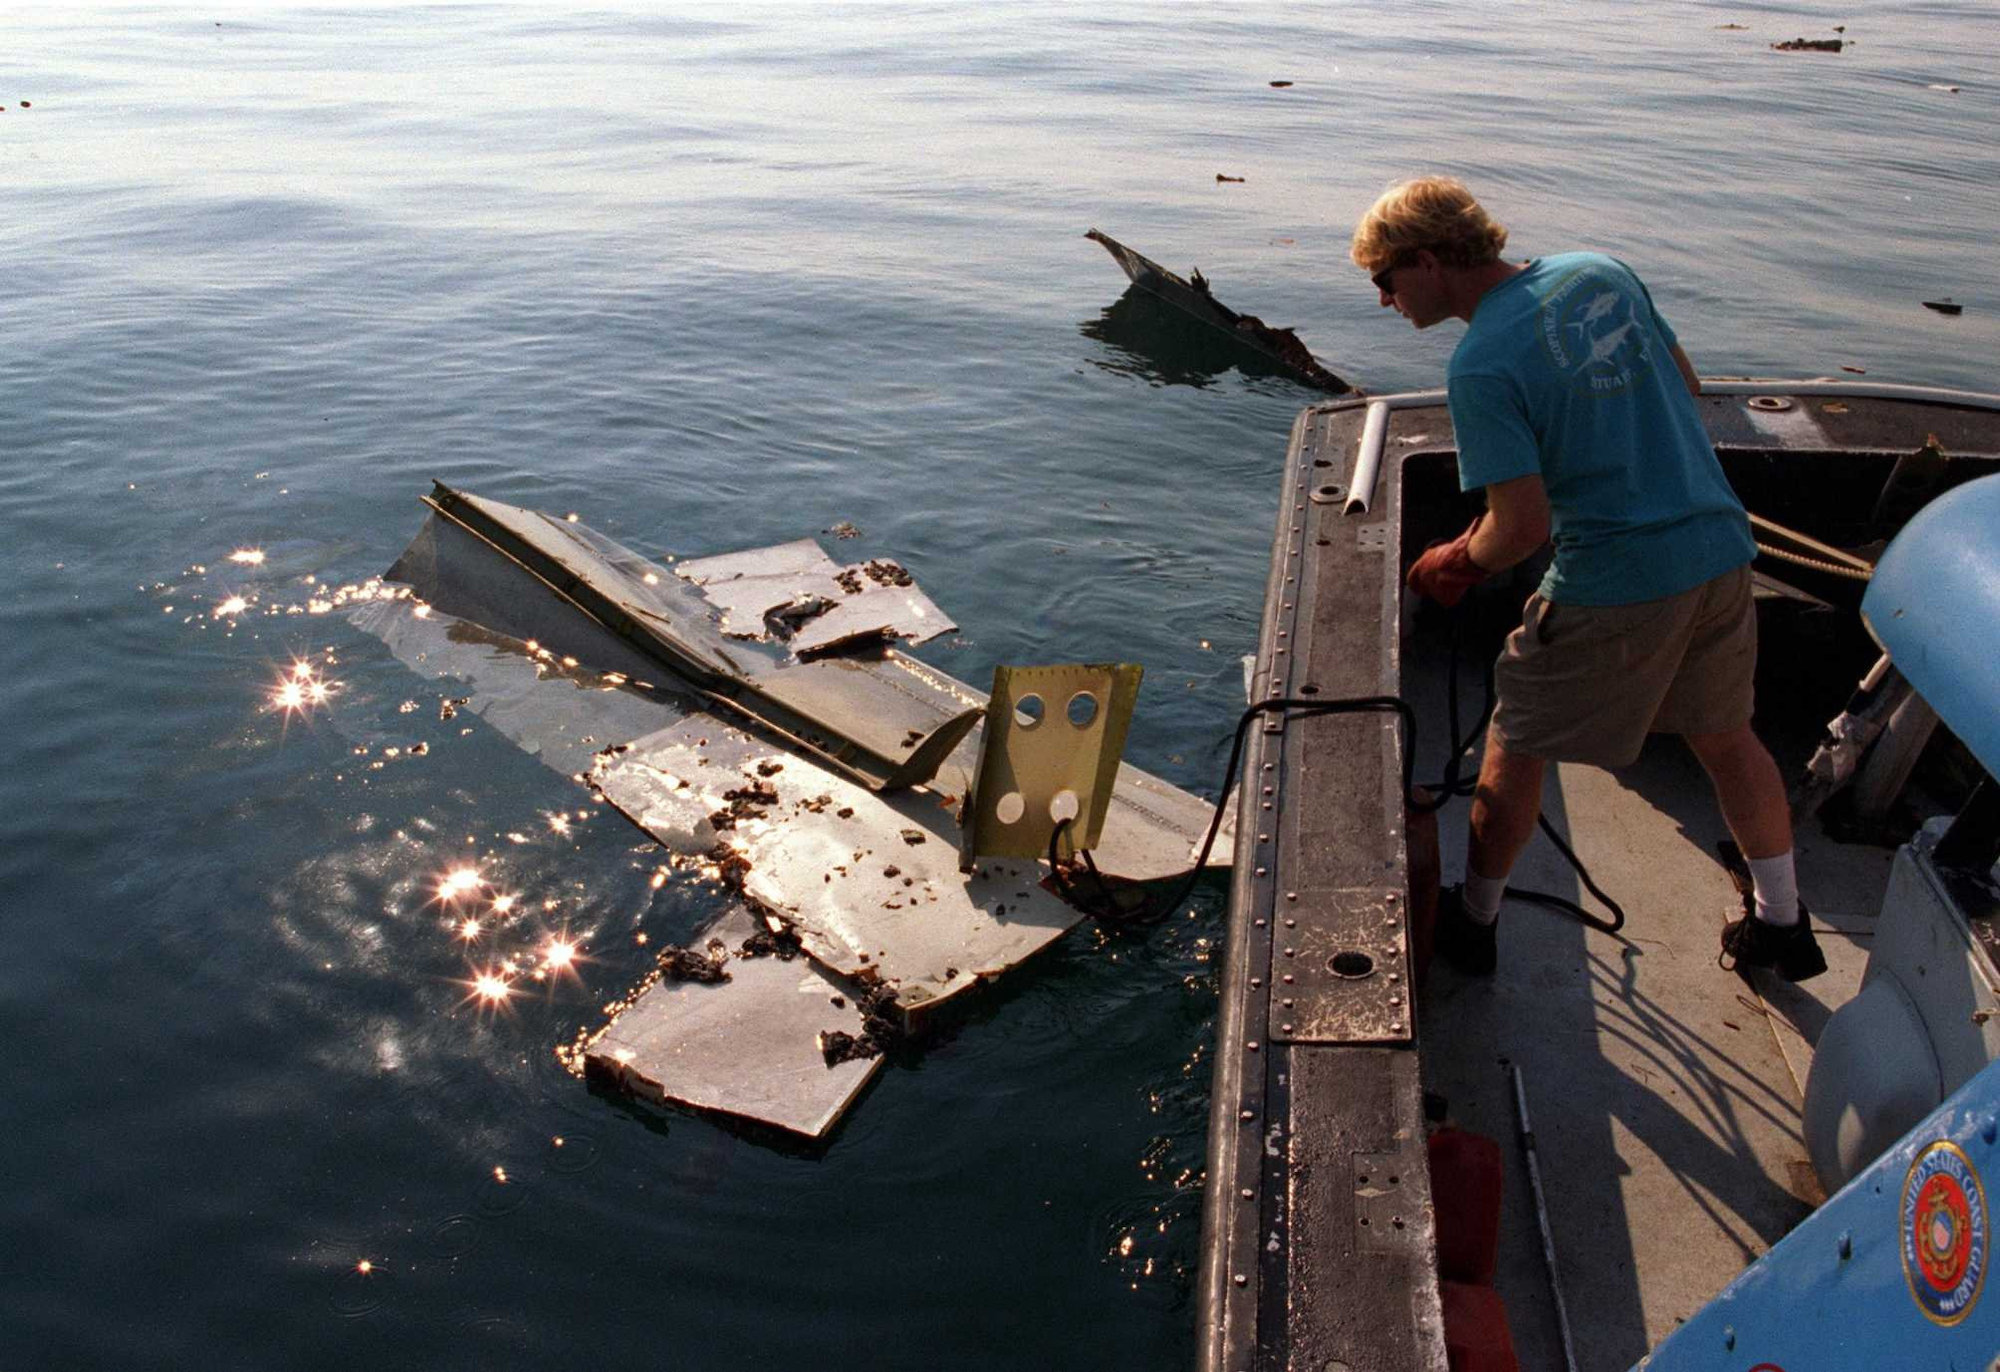 In the aftermath of the crash of TWA Flight 800, crew members of the Coast Guard cutter Jupiter load pieces of the jetliner on to the ship's deck on July 18, 1996. A section of the plane's tail can be seen in the water.